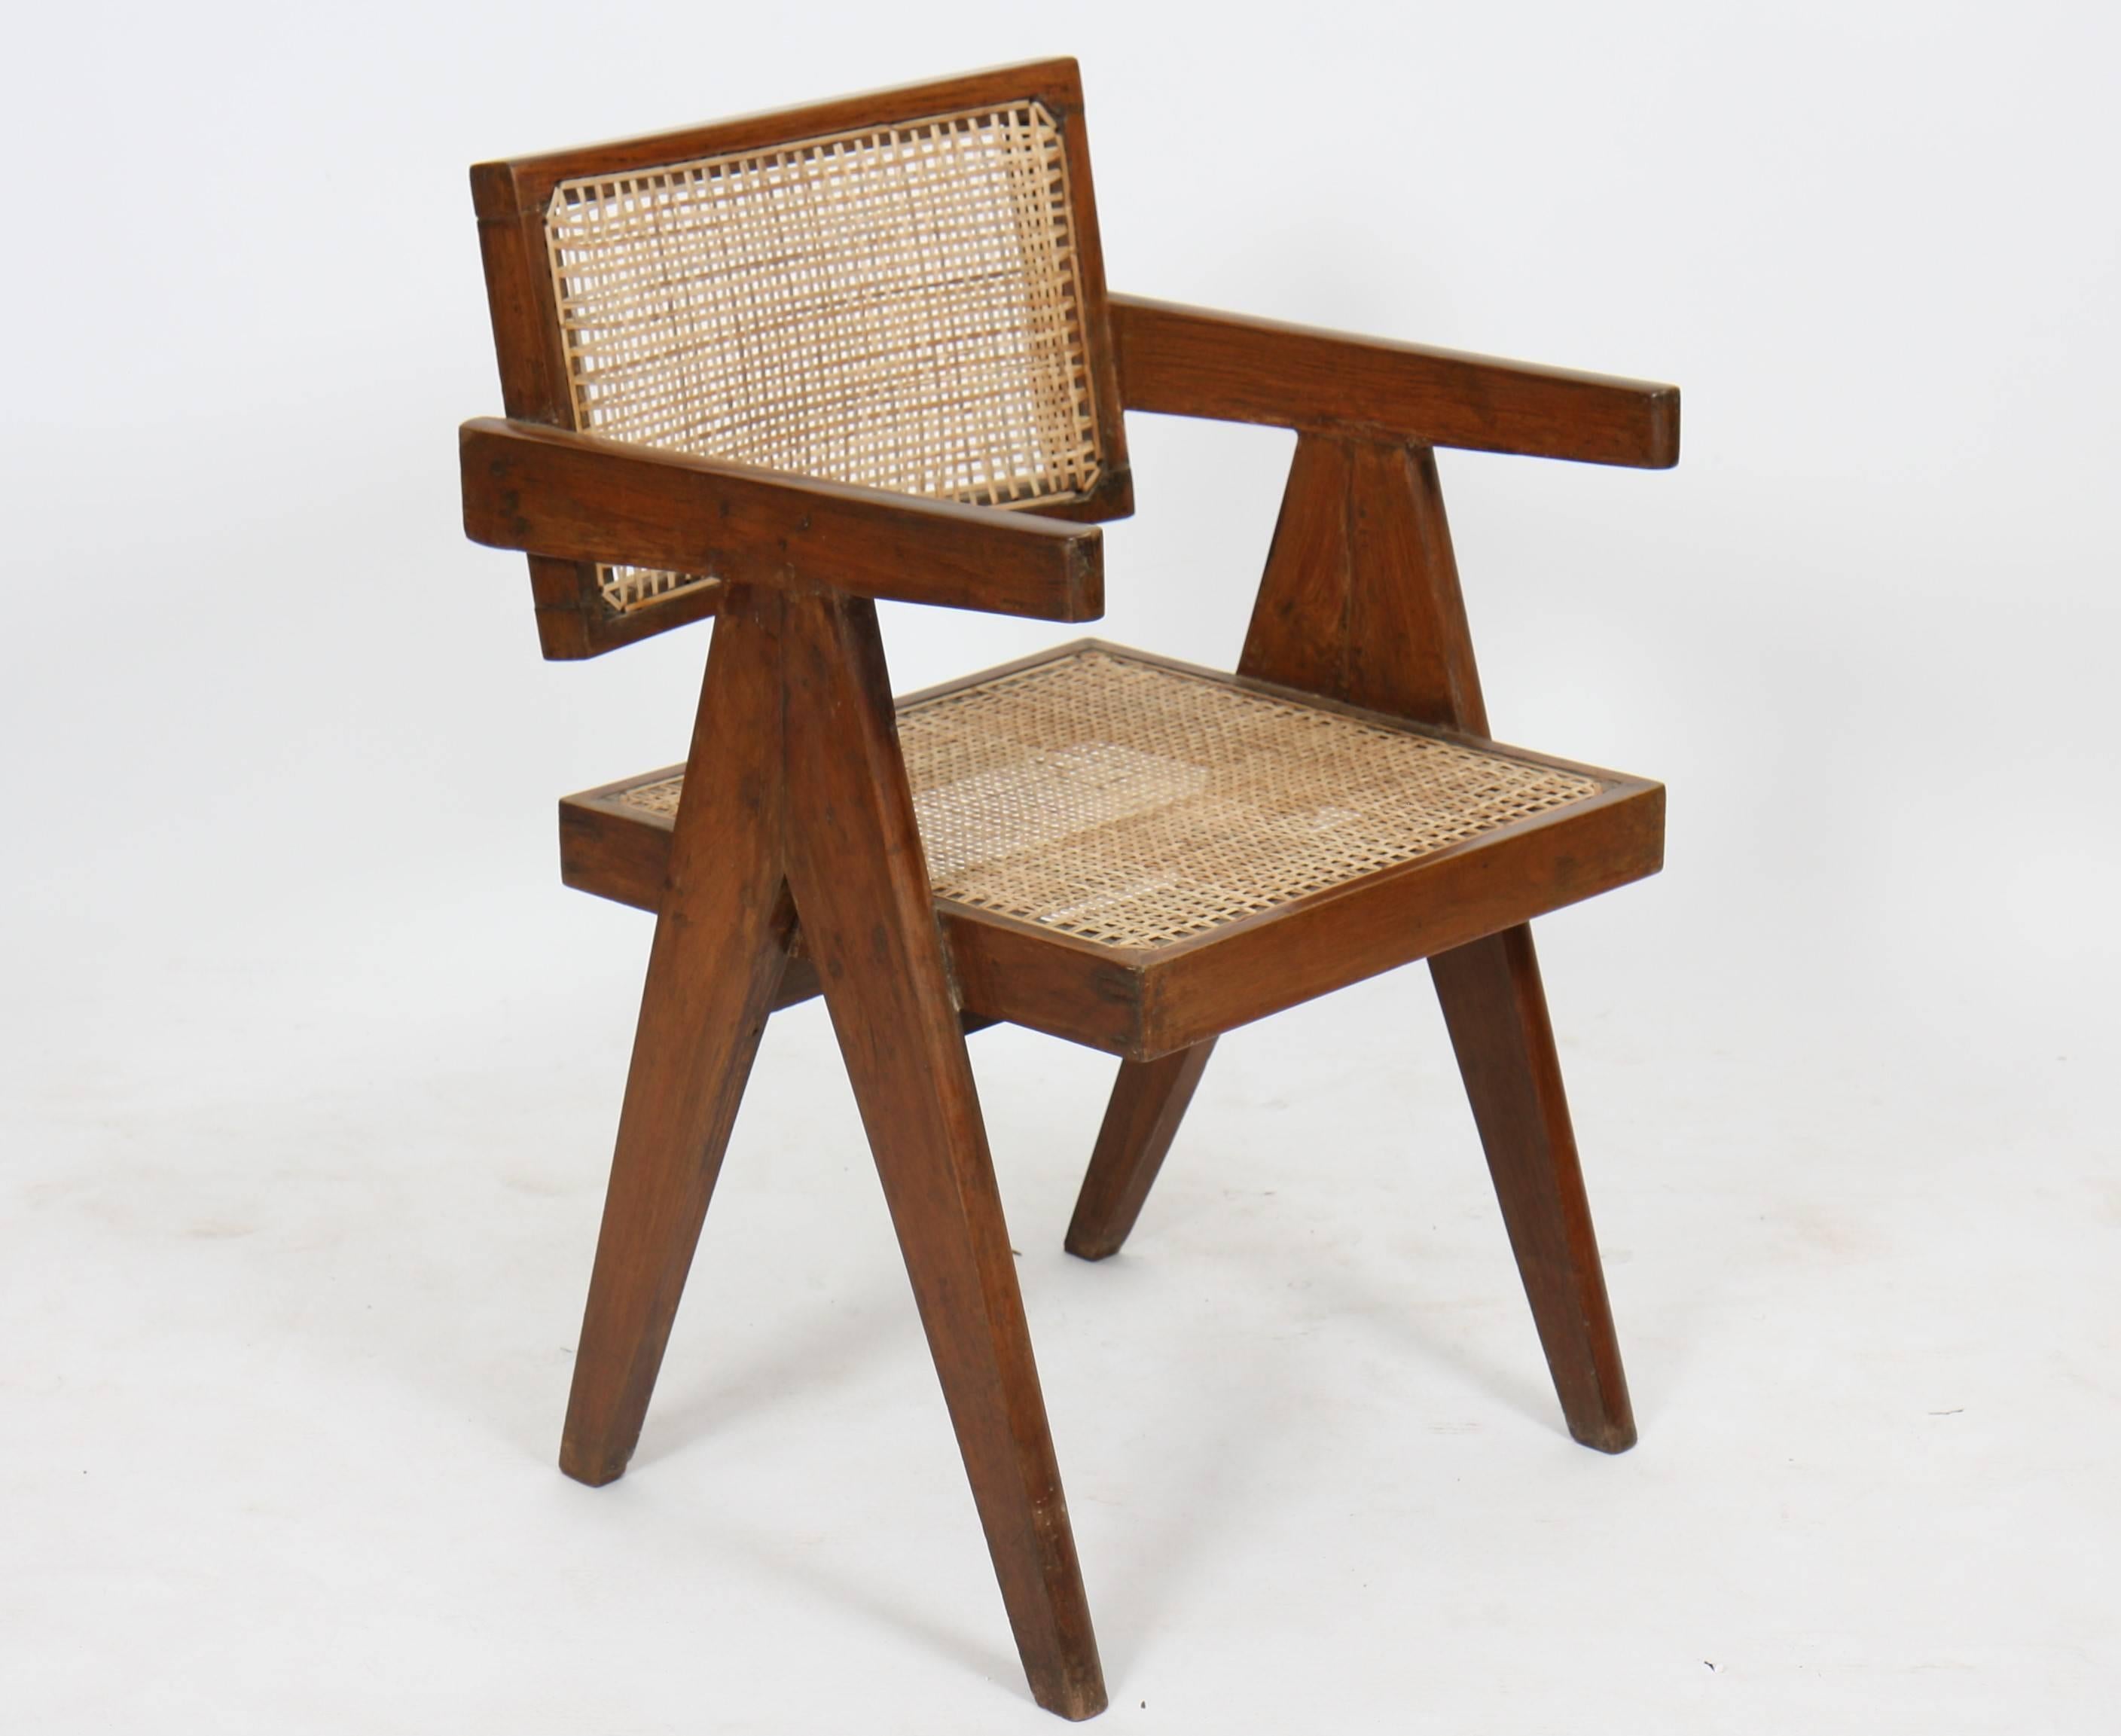 Pierre Jeanneret (1896-1967) office cane elegant chairs.
In teak with inclined and slightly curved backrest.
Detached armrests and side
compass design armrests. Cane seat and backrest restored,
circa 1956.
Measures: Height 76 cm x length 50 cm x